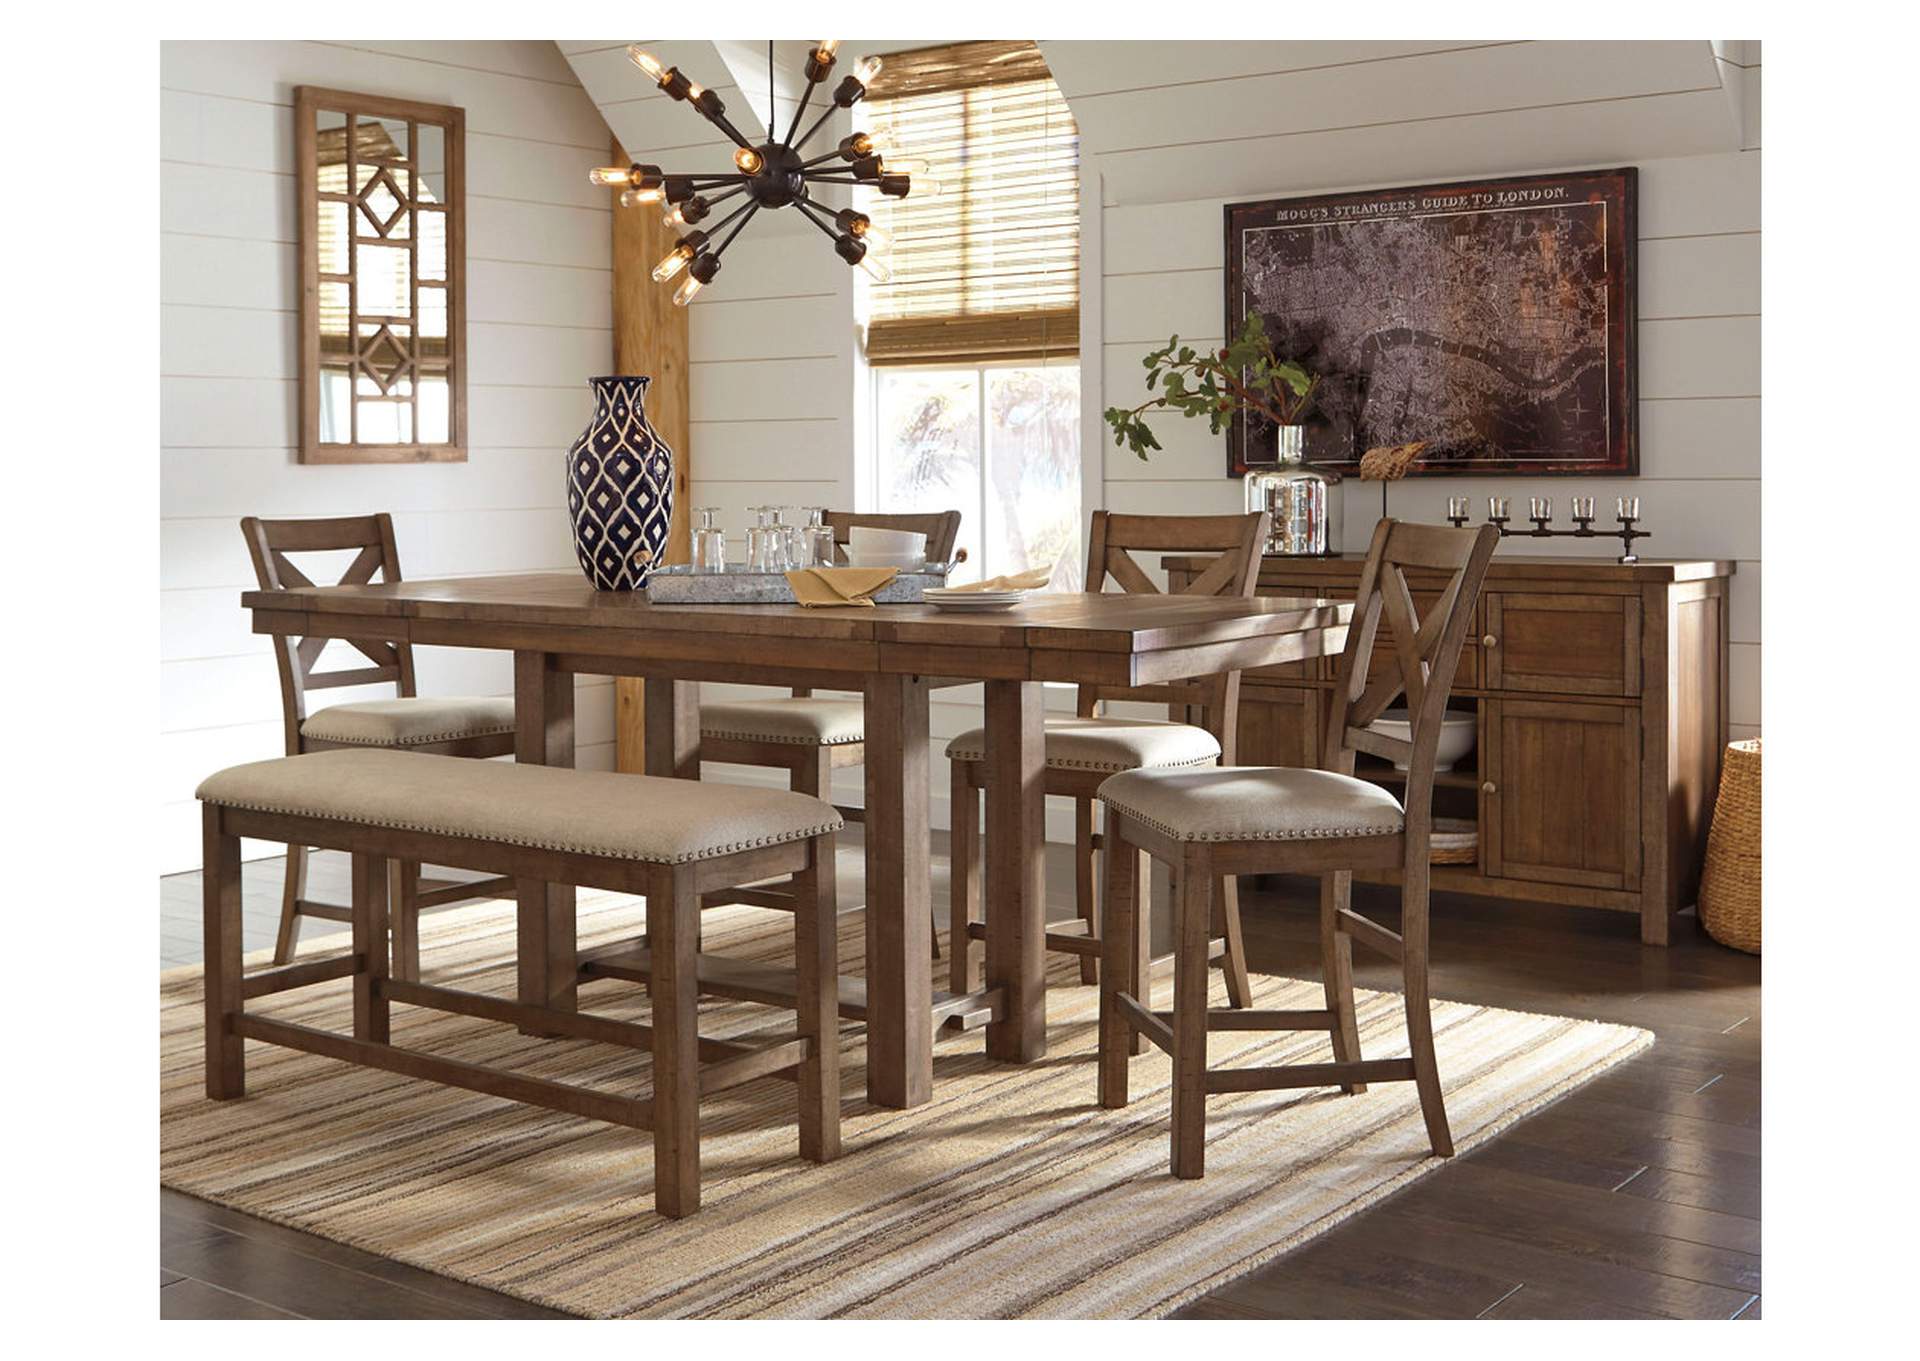 Moriville Counter Height Dining Table with 4 Barstools, Bench, and Server,Signature Design By Ashley